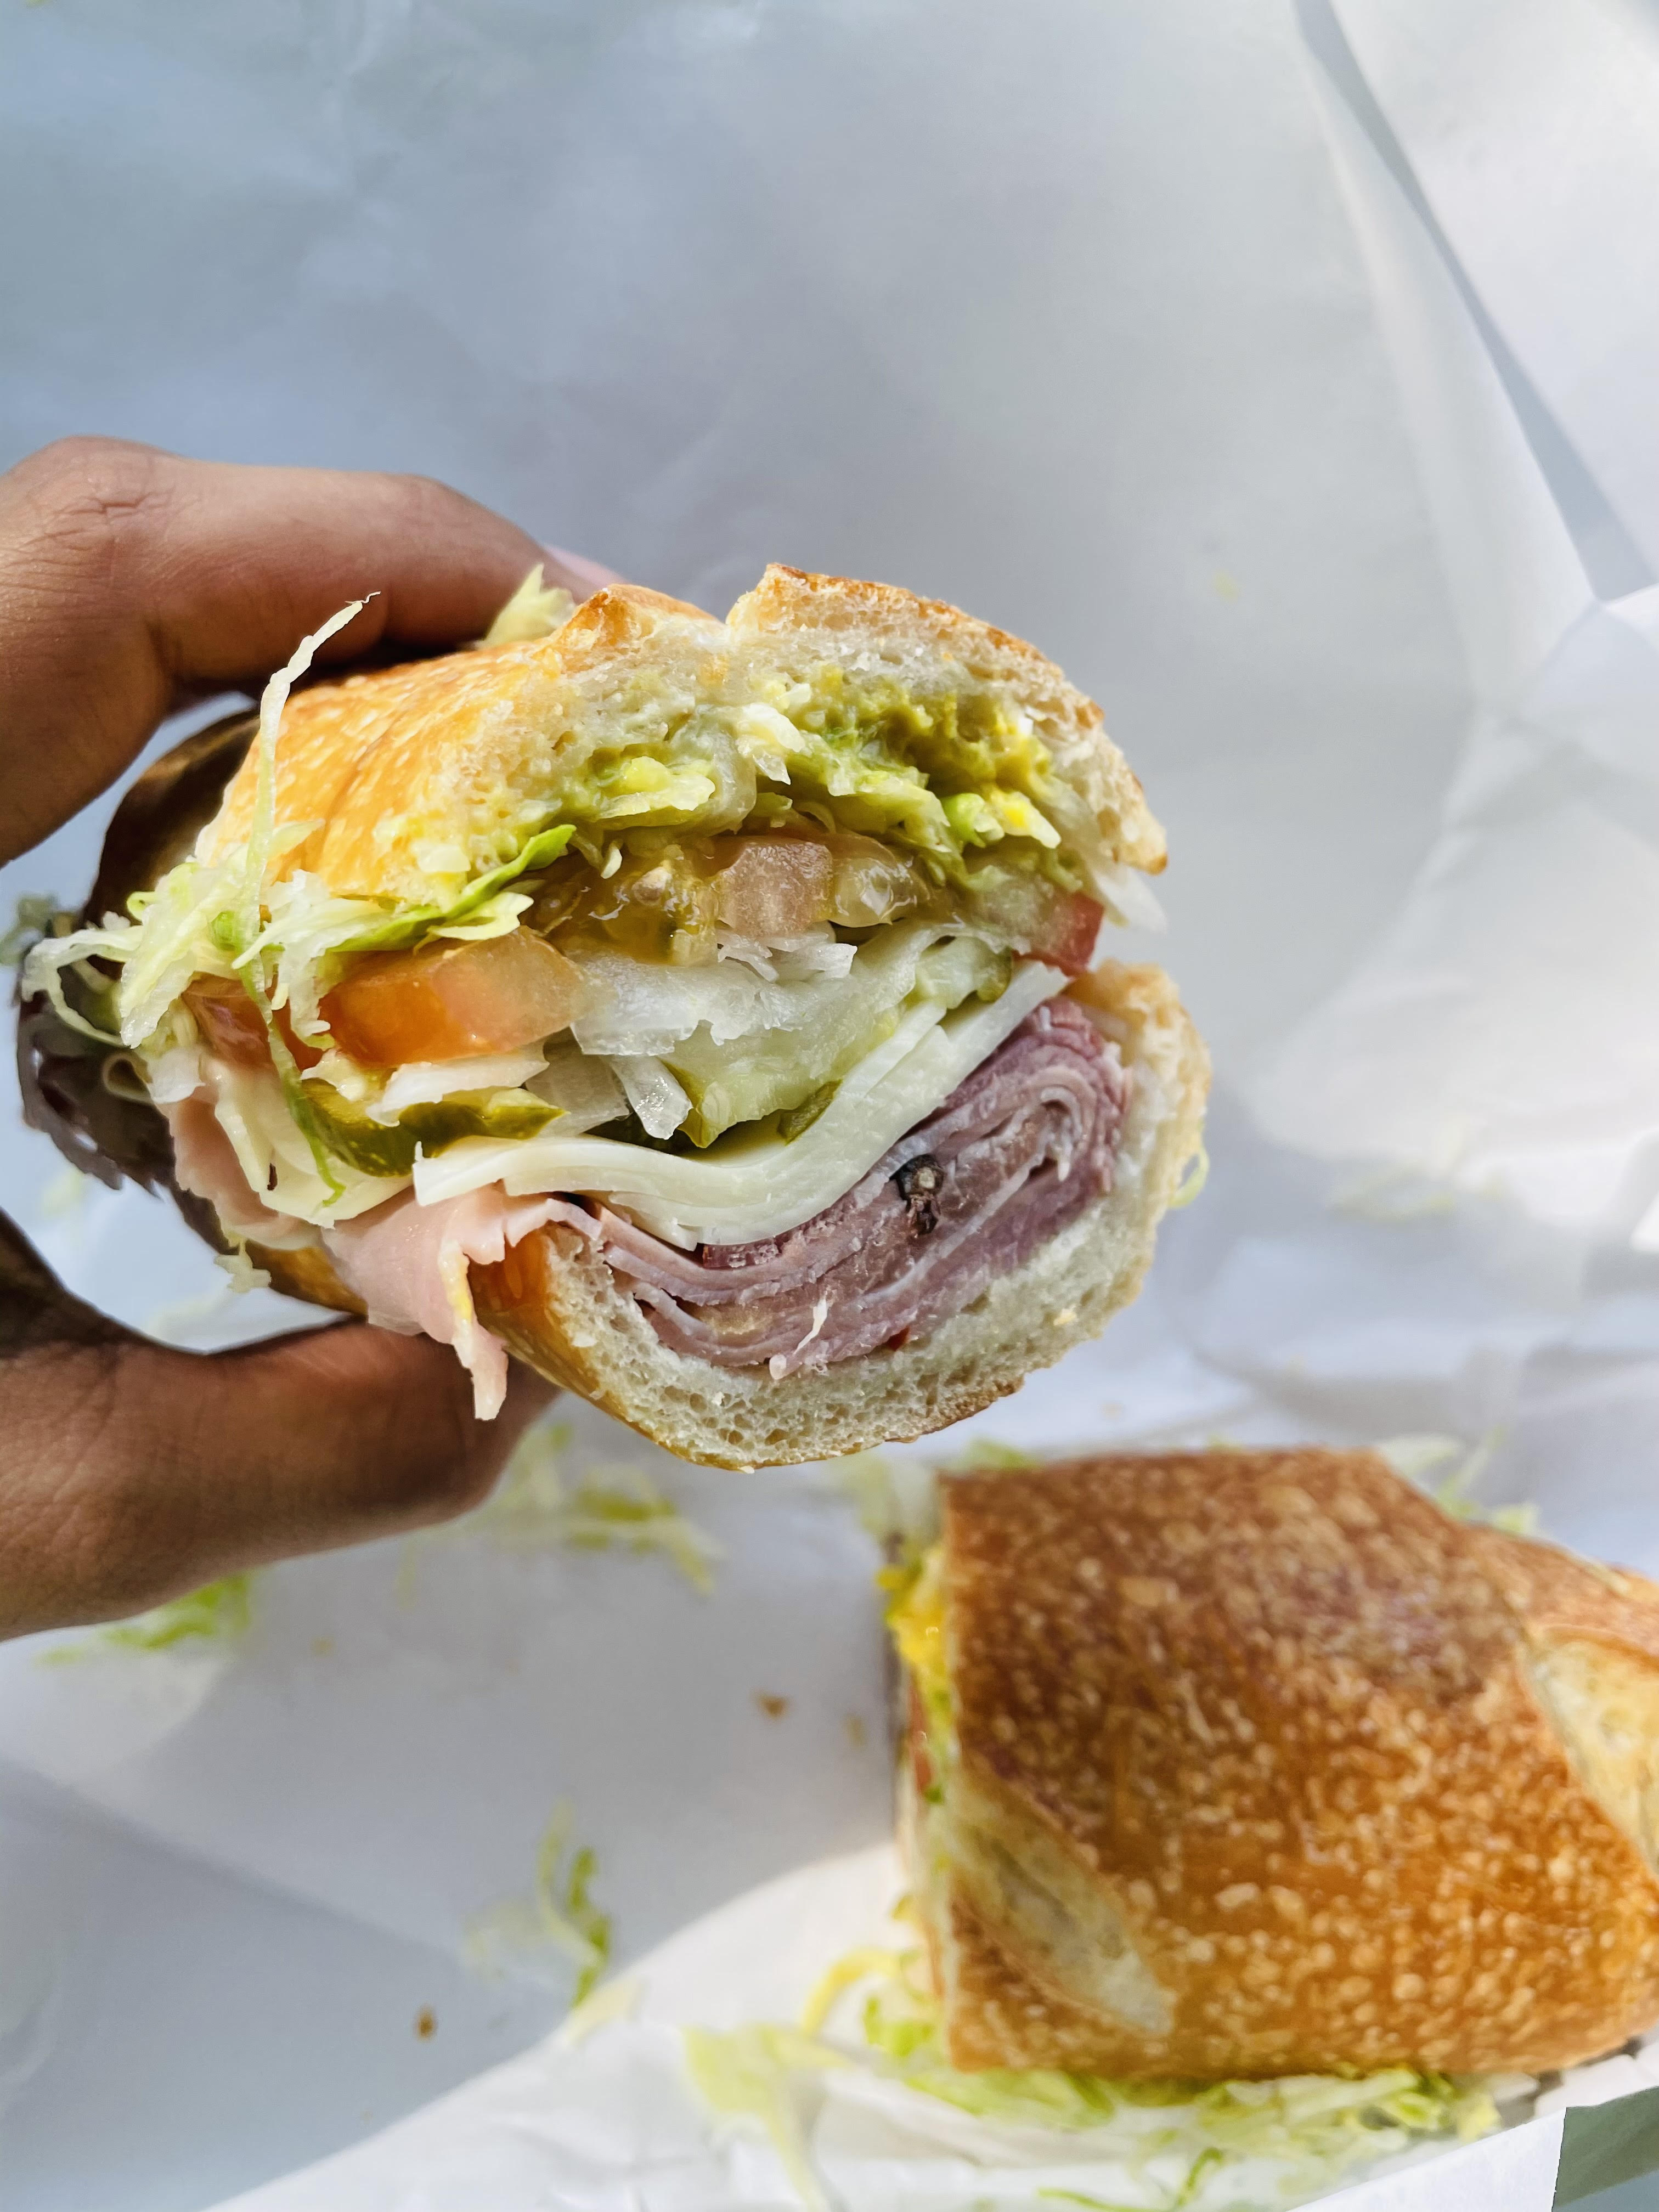 Bub and Grandma's Pays Homage to Tri-State Delis at Glassell Park